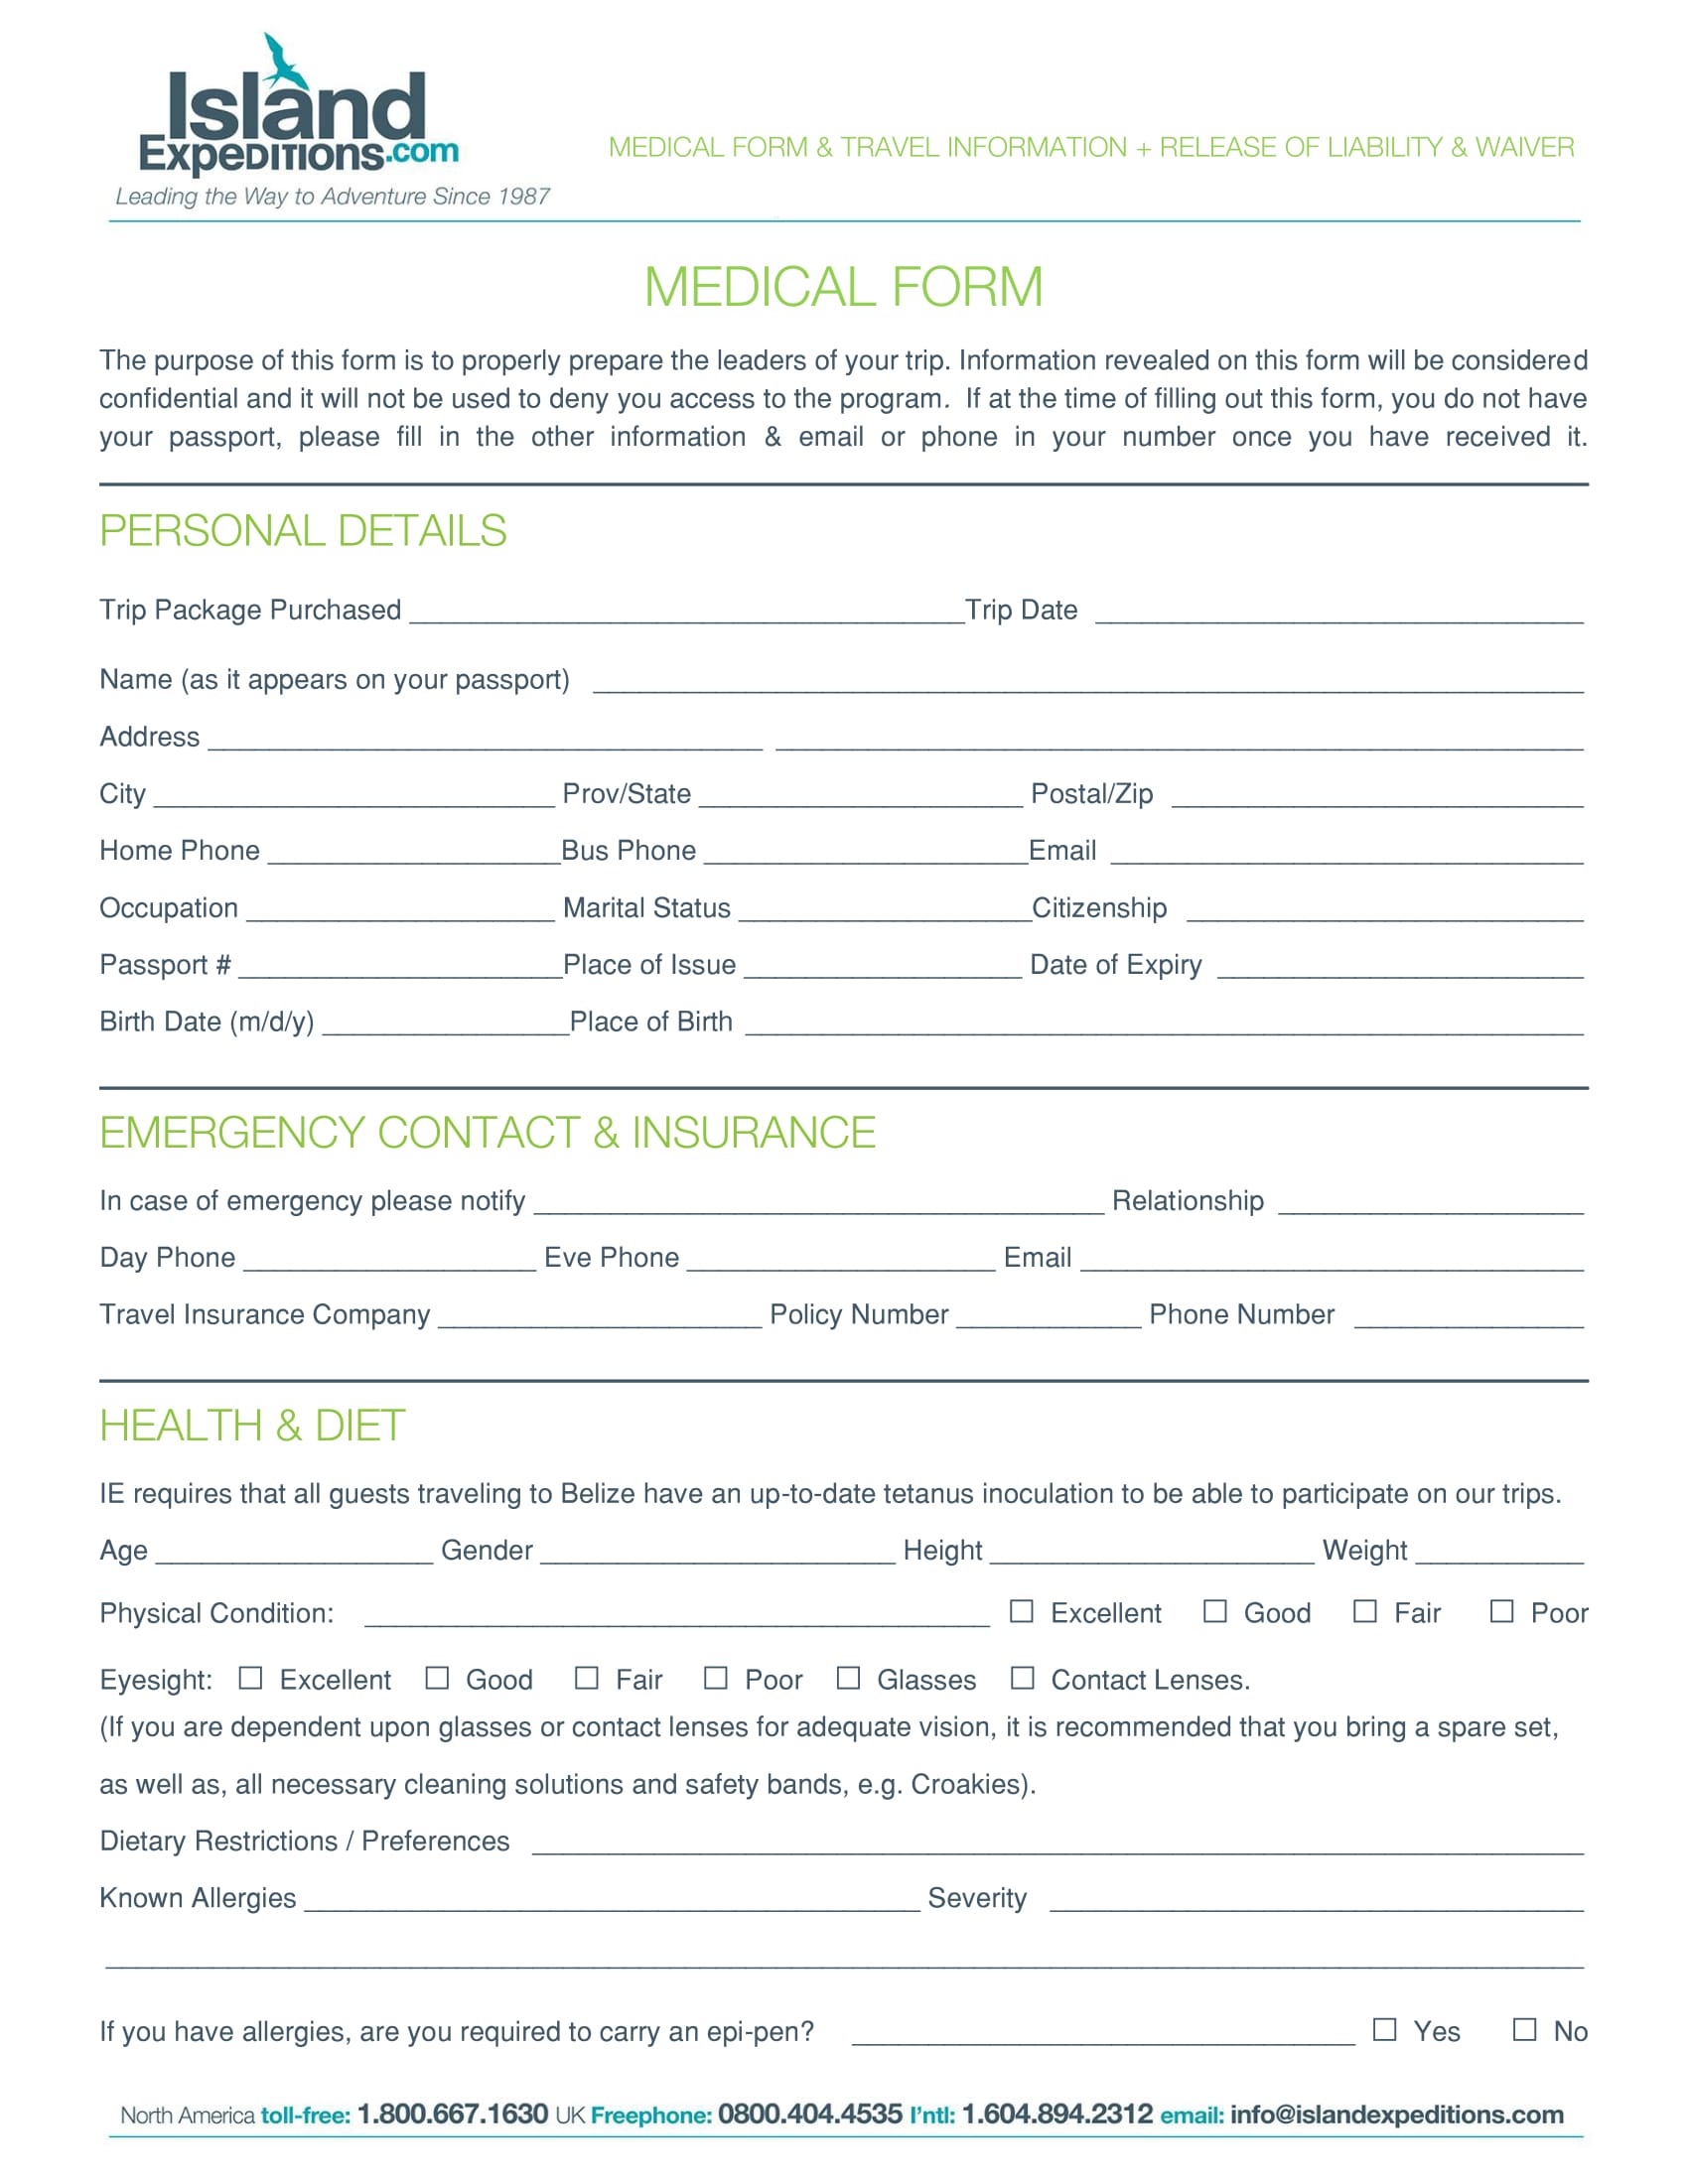 travel medical form example 1